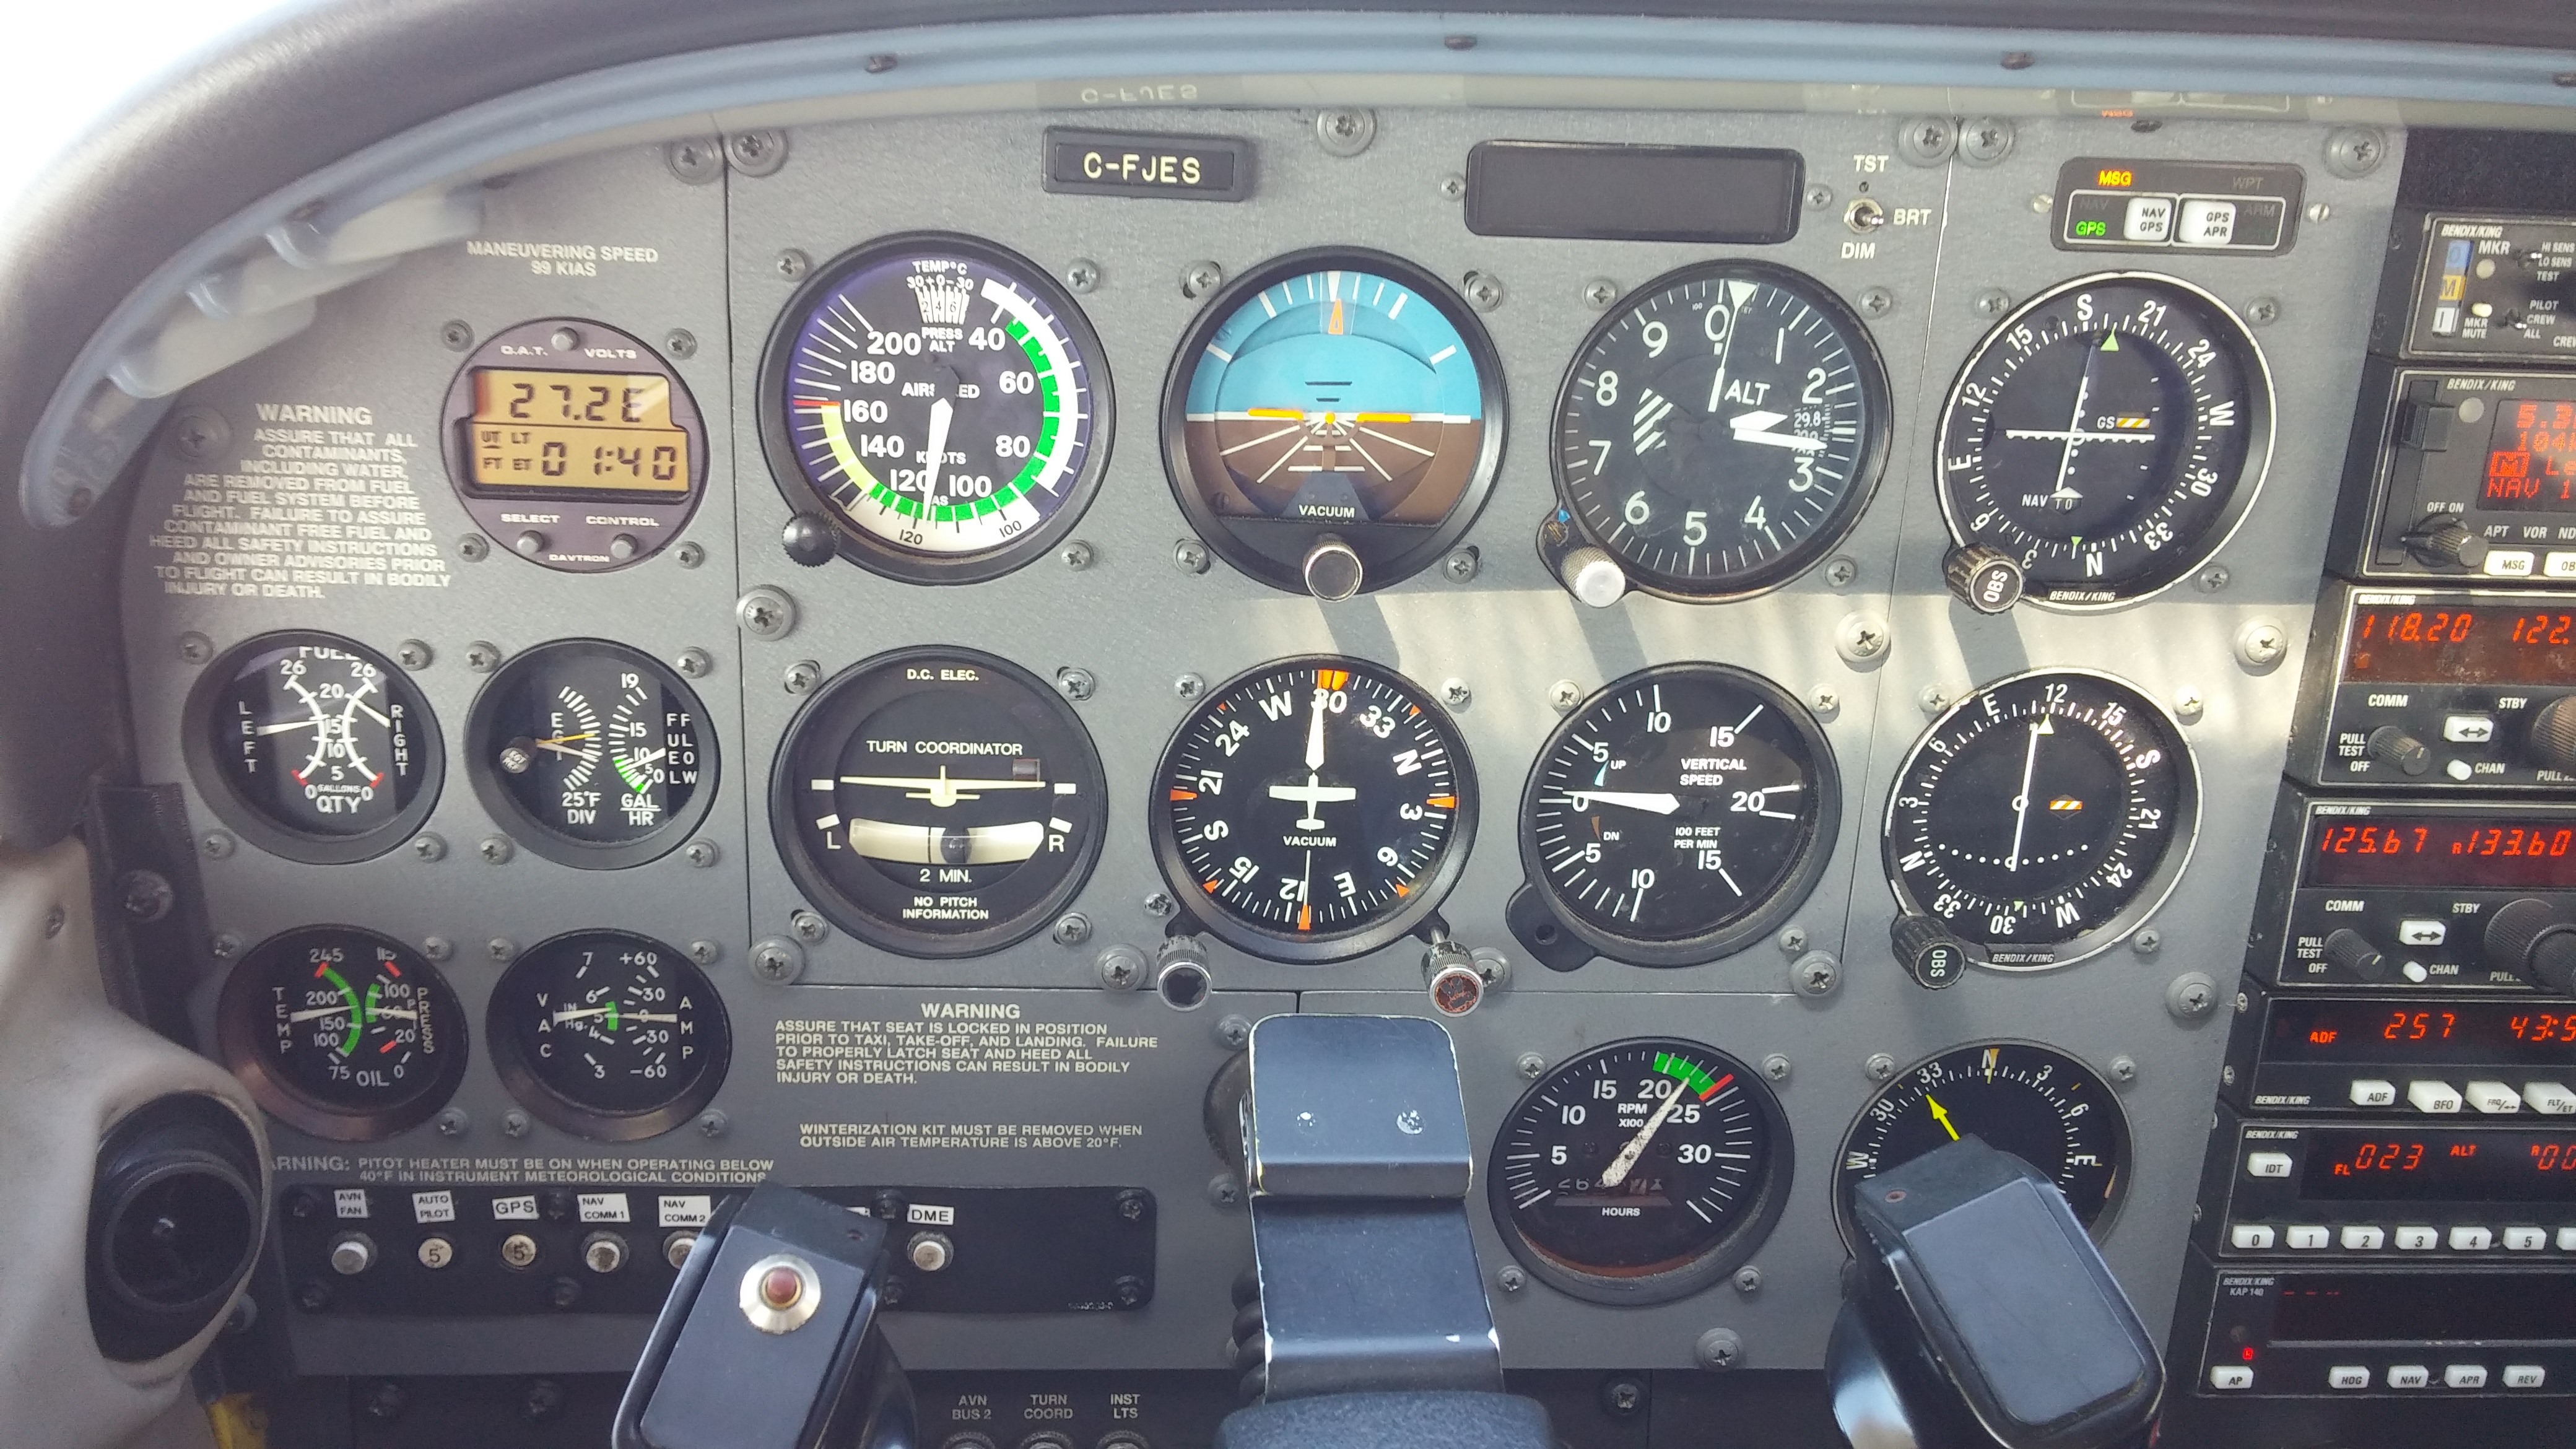 Cockpit view of the C172R - note the lower operating RPMs